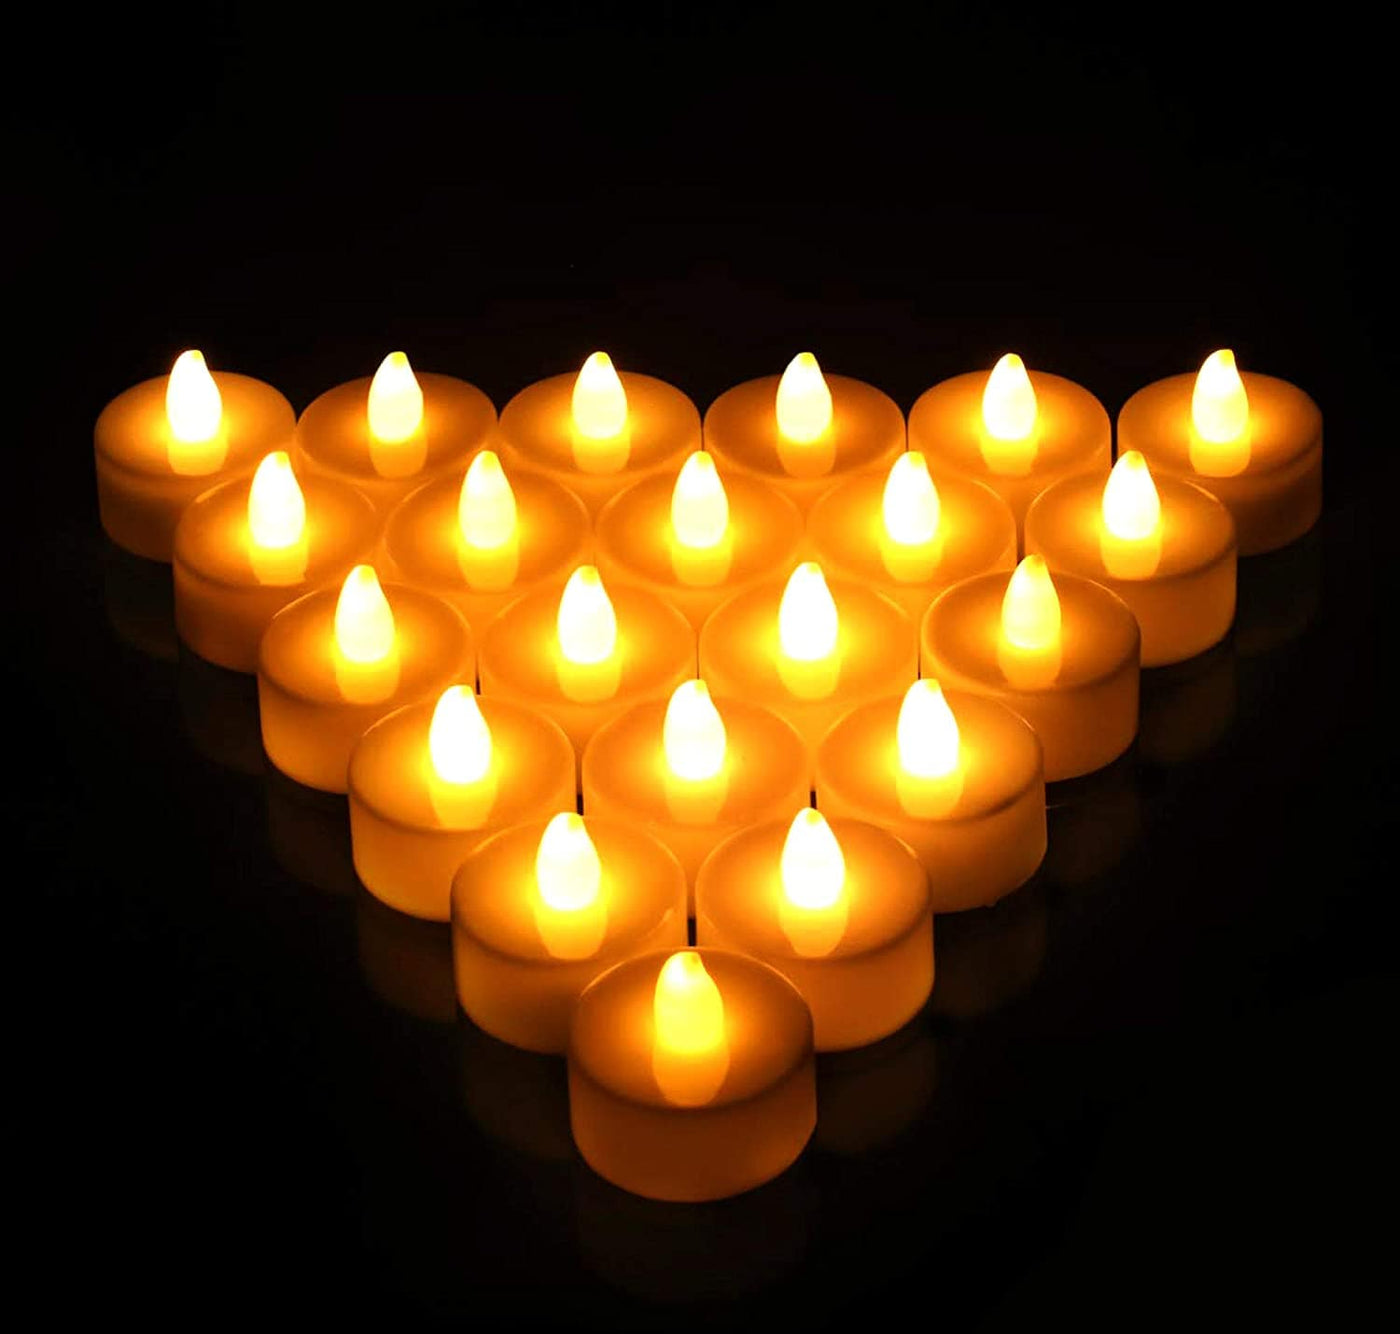 New Jaipur Handicraft led candles Pack of 500 LED Candles 🕯at Rs 20 each / Flameless 🔥Electric LED Candles for Diwali / Candles for Home 🏠Decoration